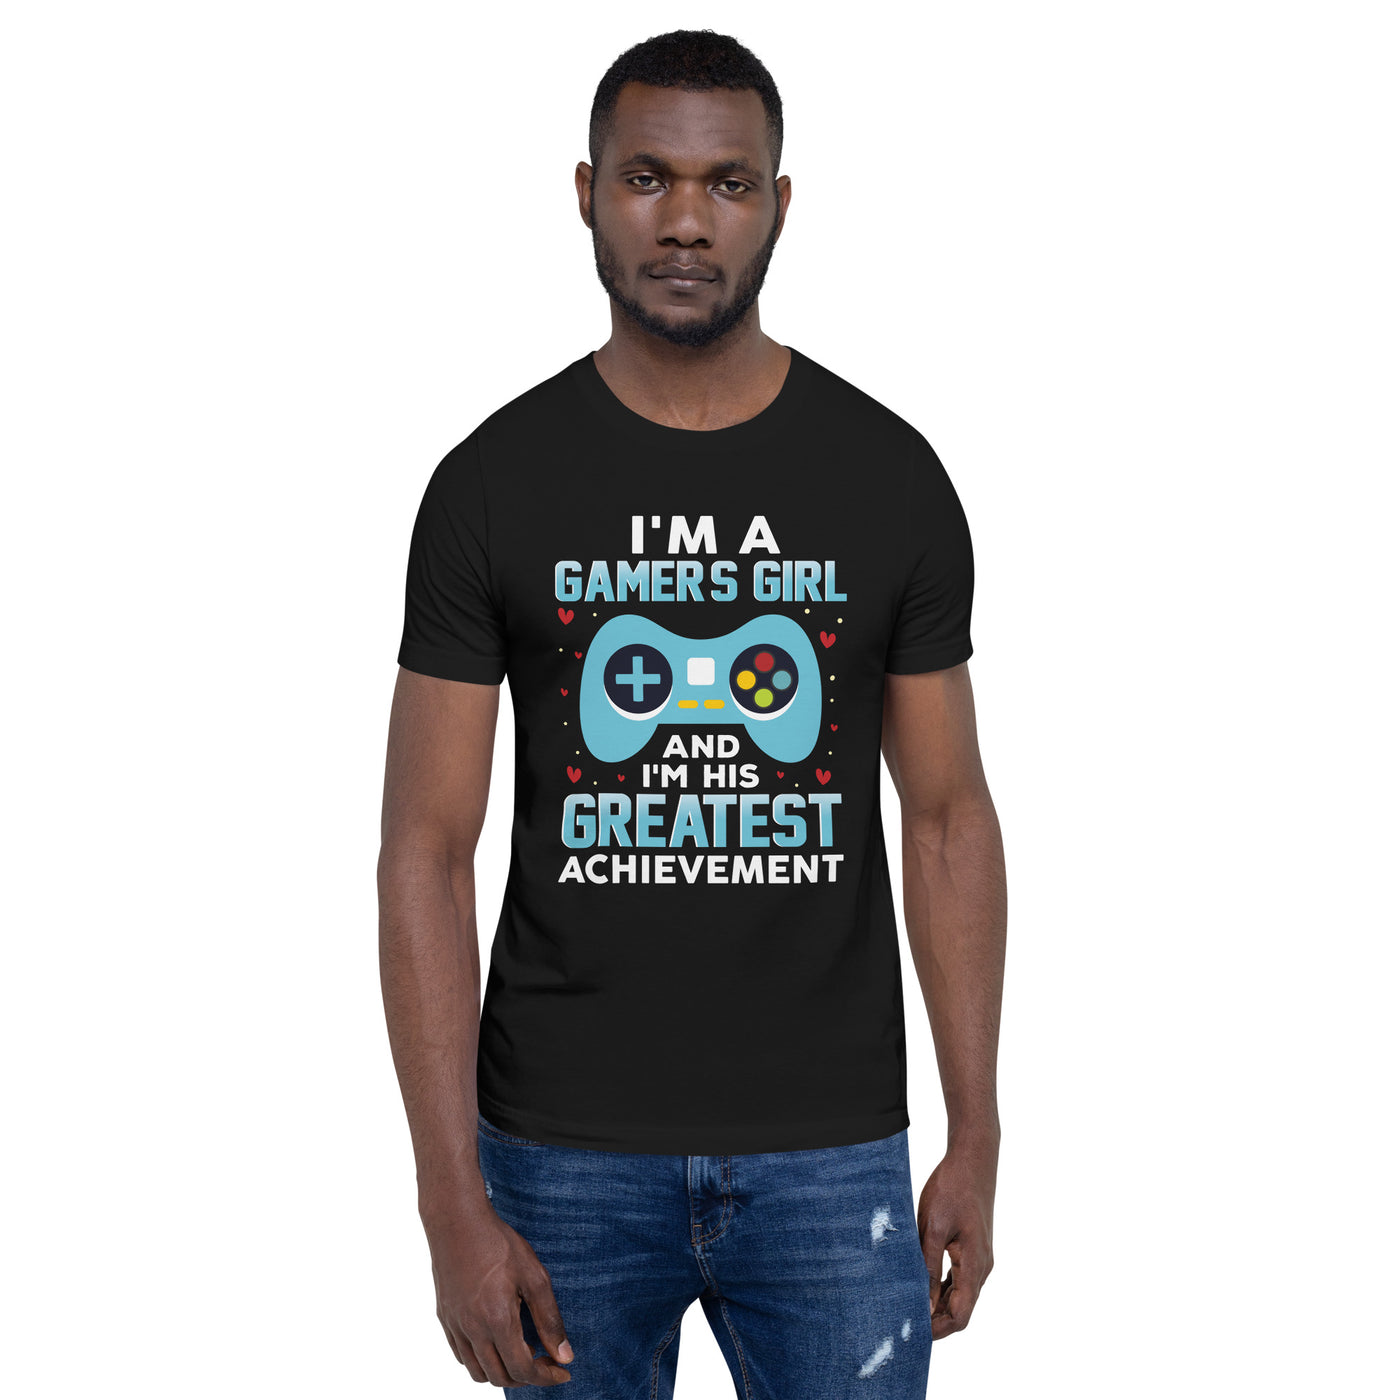 I am a Gamer's Girl, I am his Greatest Achievement (turquoise text ) - Unisex t-shirt